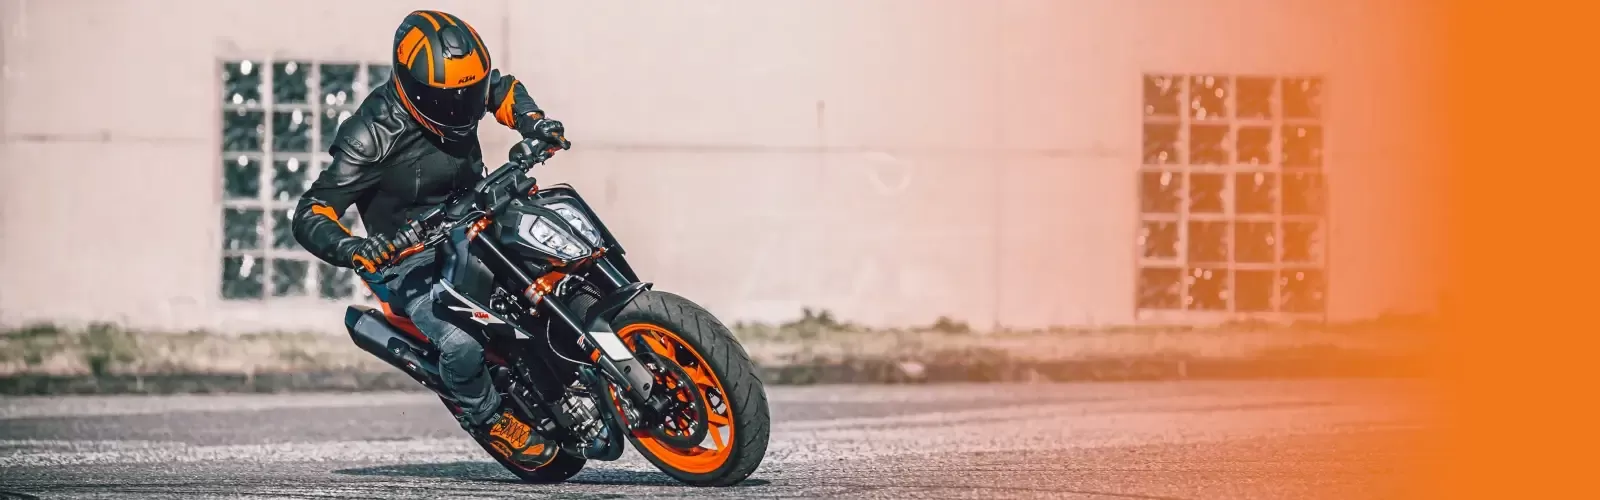 Orwell Motorcycles KTM Offer